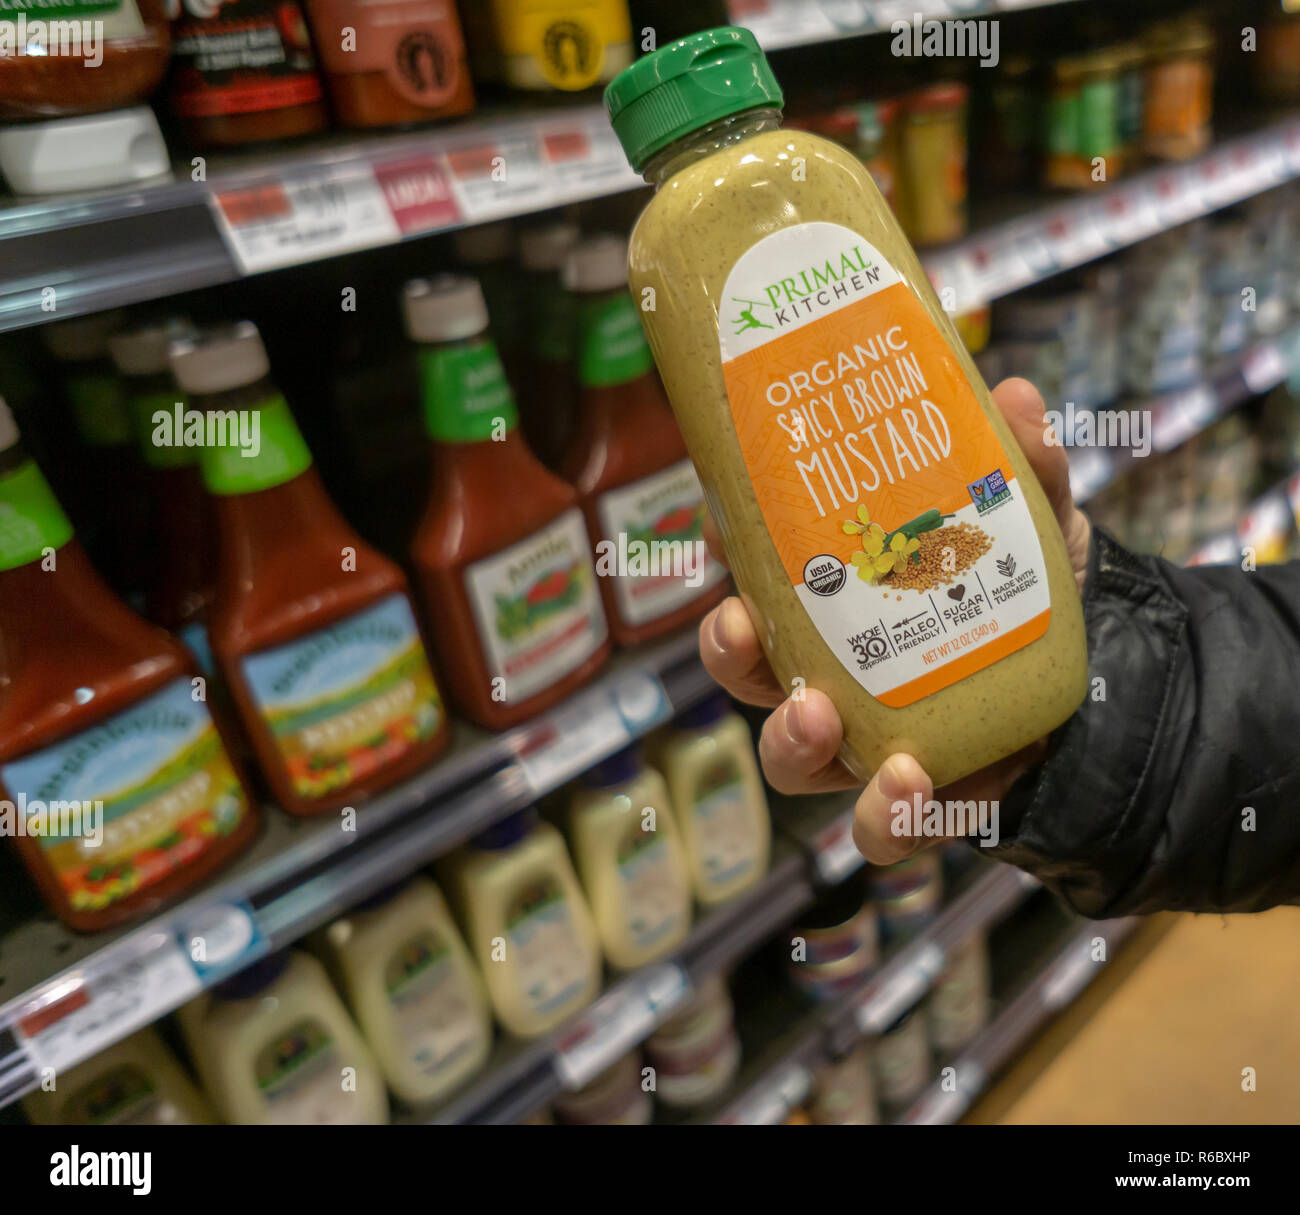 A shopper chooses a bottle of Primal Kitchen brand Organic Spicy Brown mustard in a supermarket in New York on Thursday, November 29, 2018. Kraft Heinz announced it will buy the paleo diet condiment and dressing company Primal Kitchen for $200 million. (Â© Richard B. Levine) Stock Photo